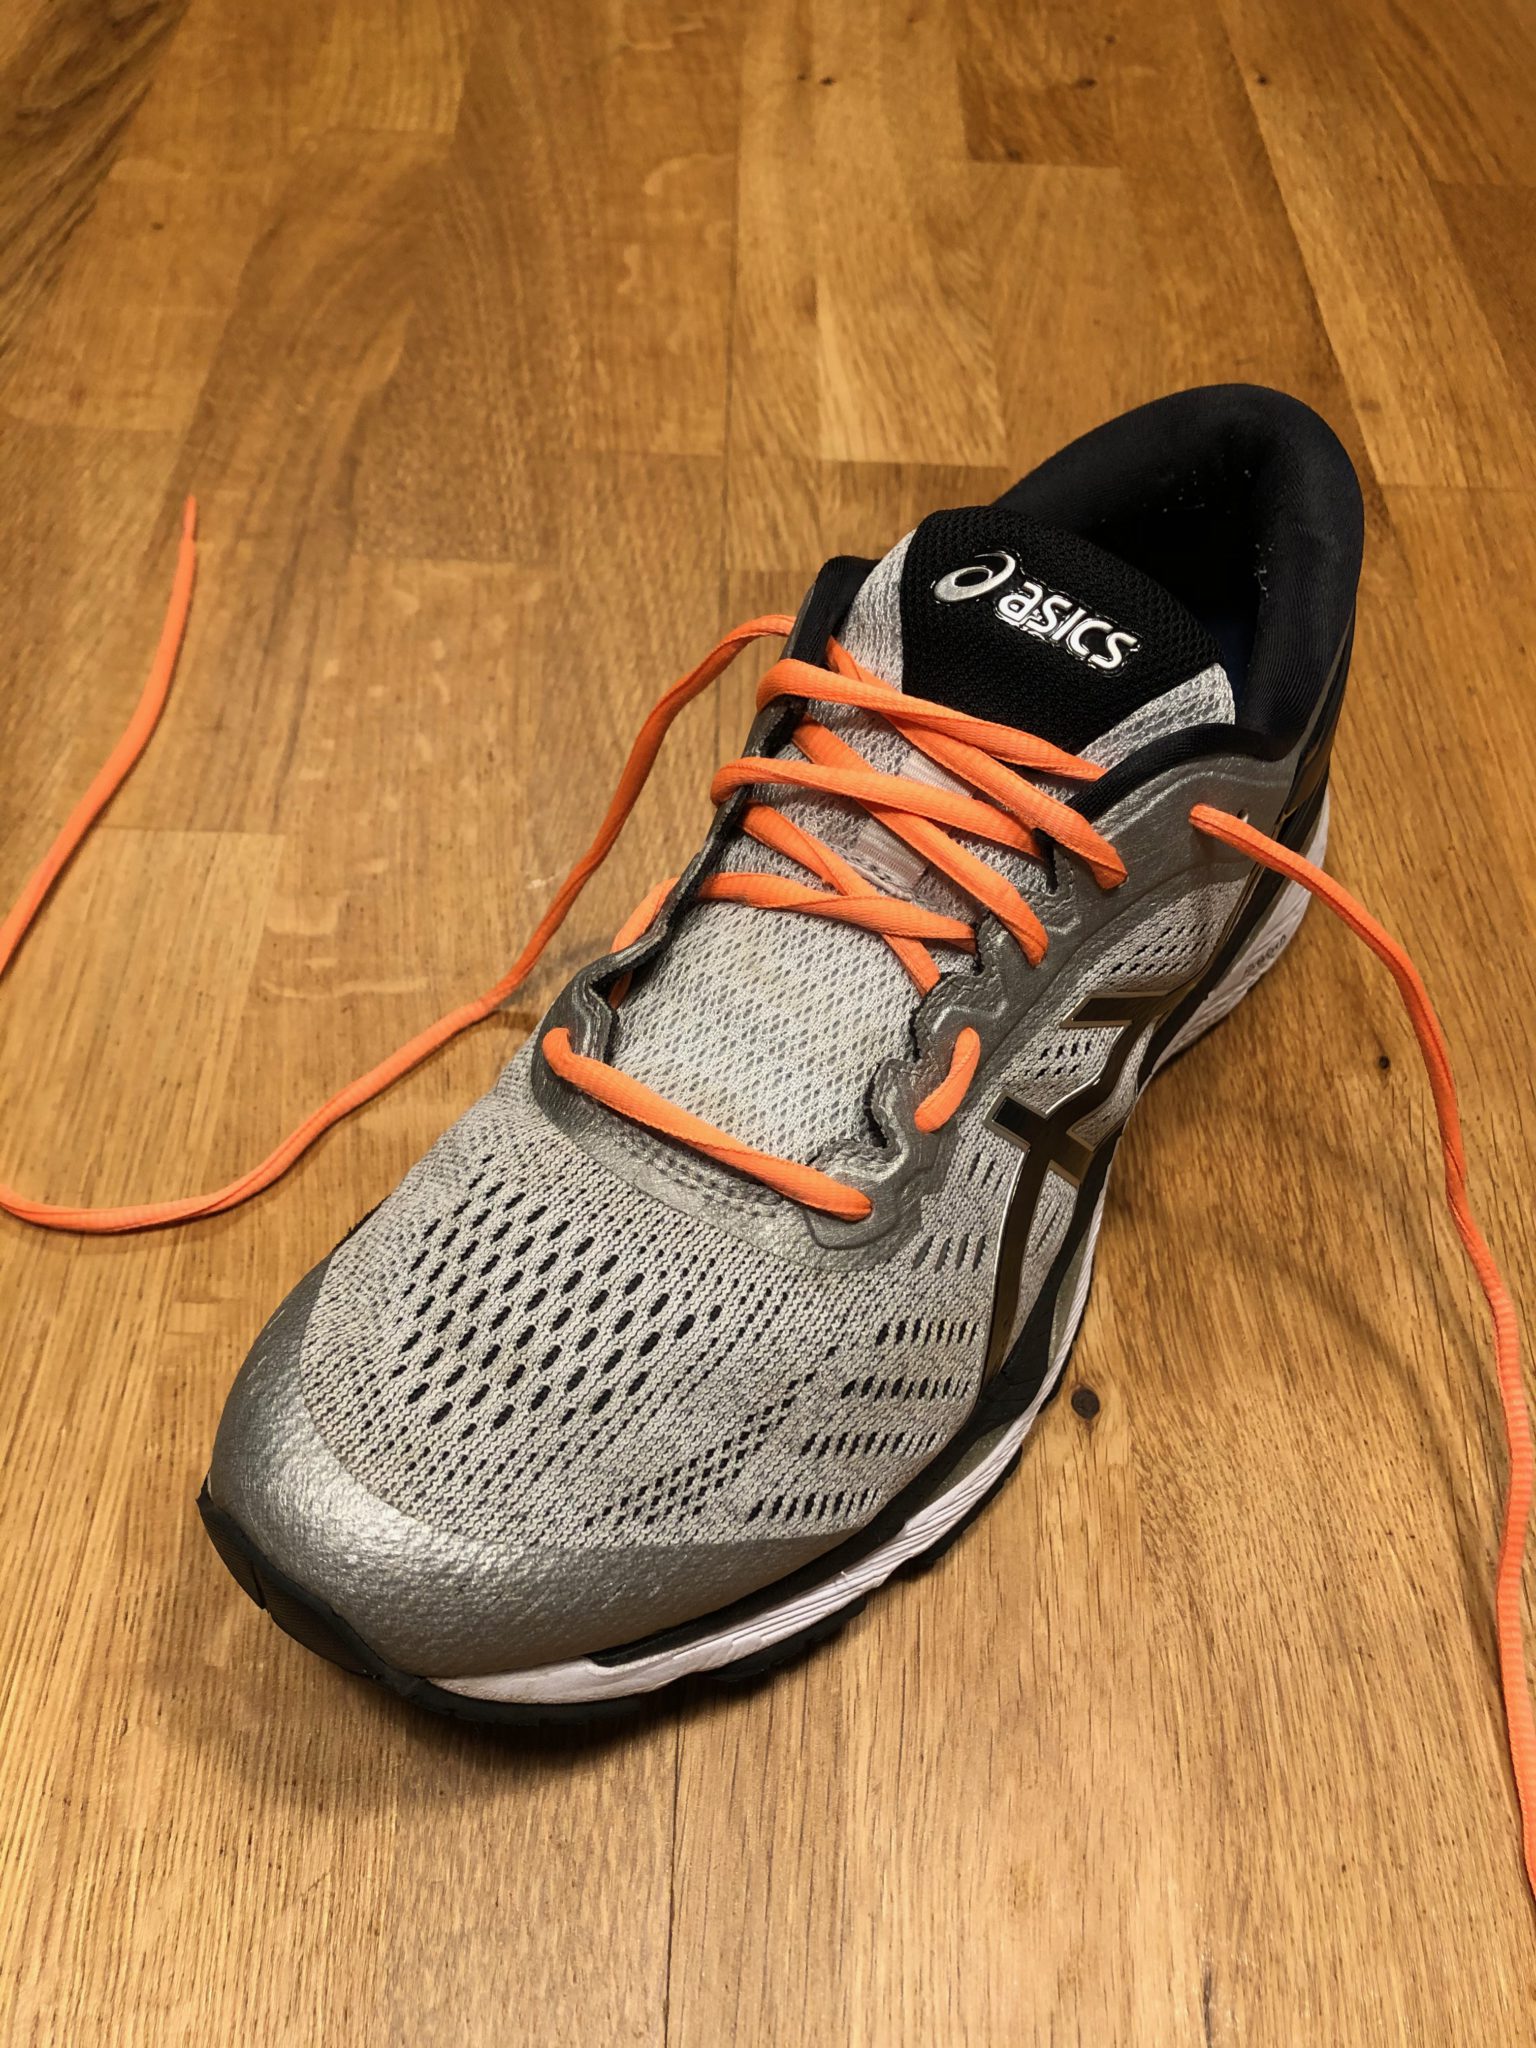 Running shoe lacing methods to tackle fit problems | MORE FUN 2 RUN